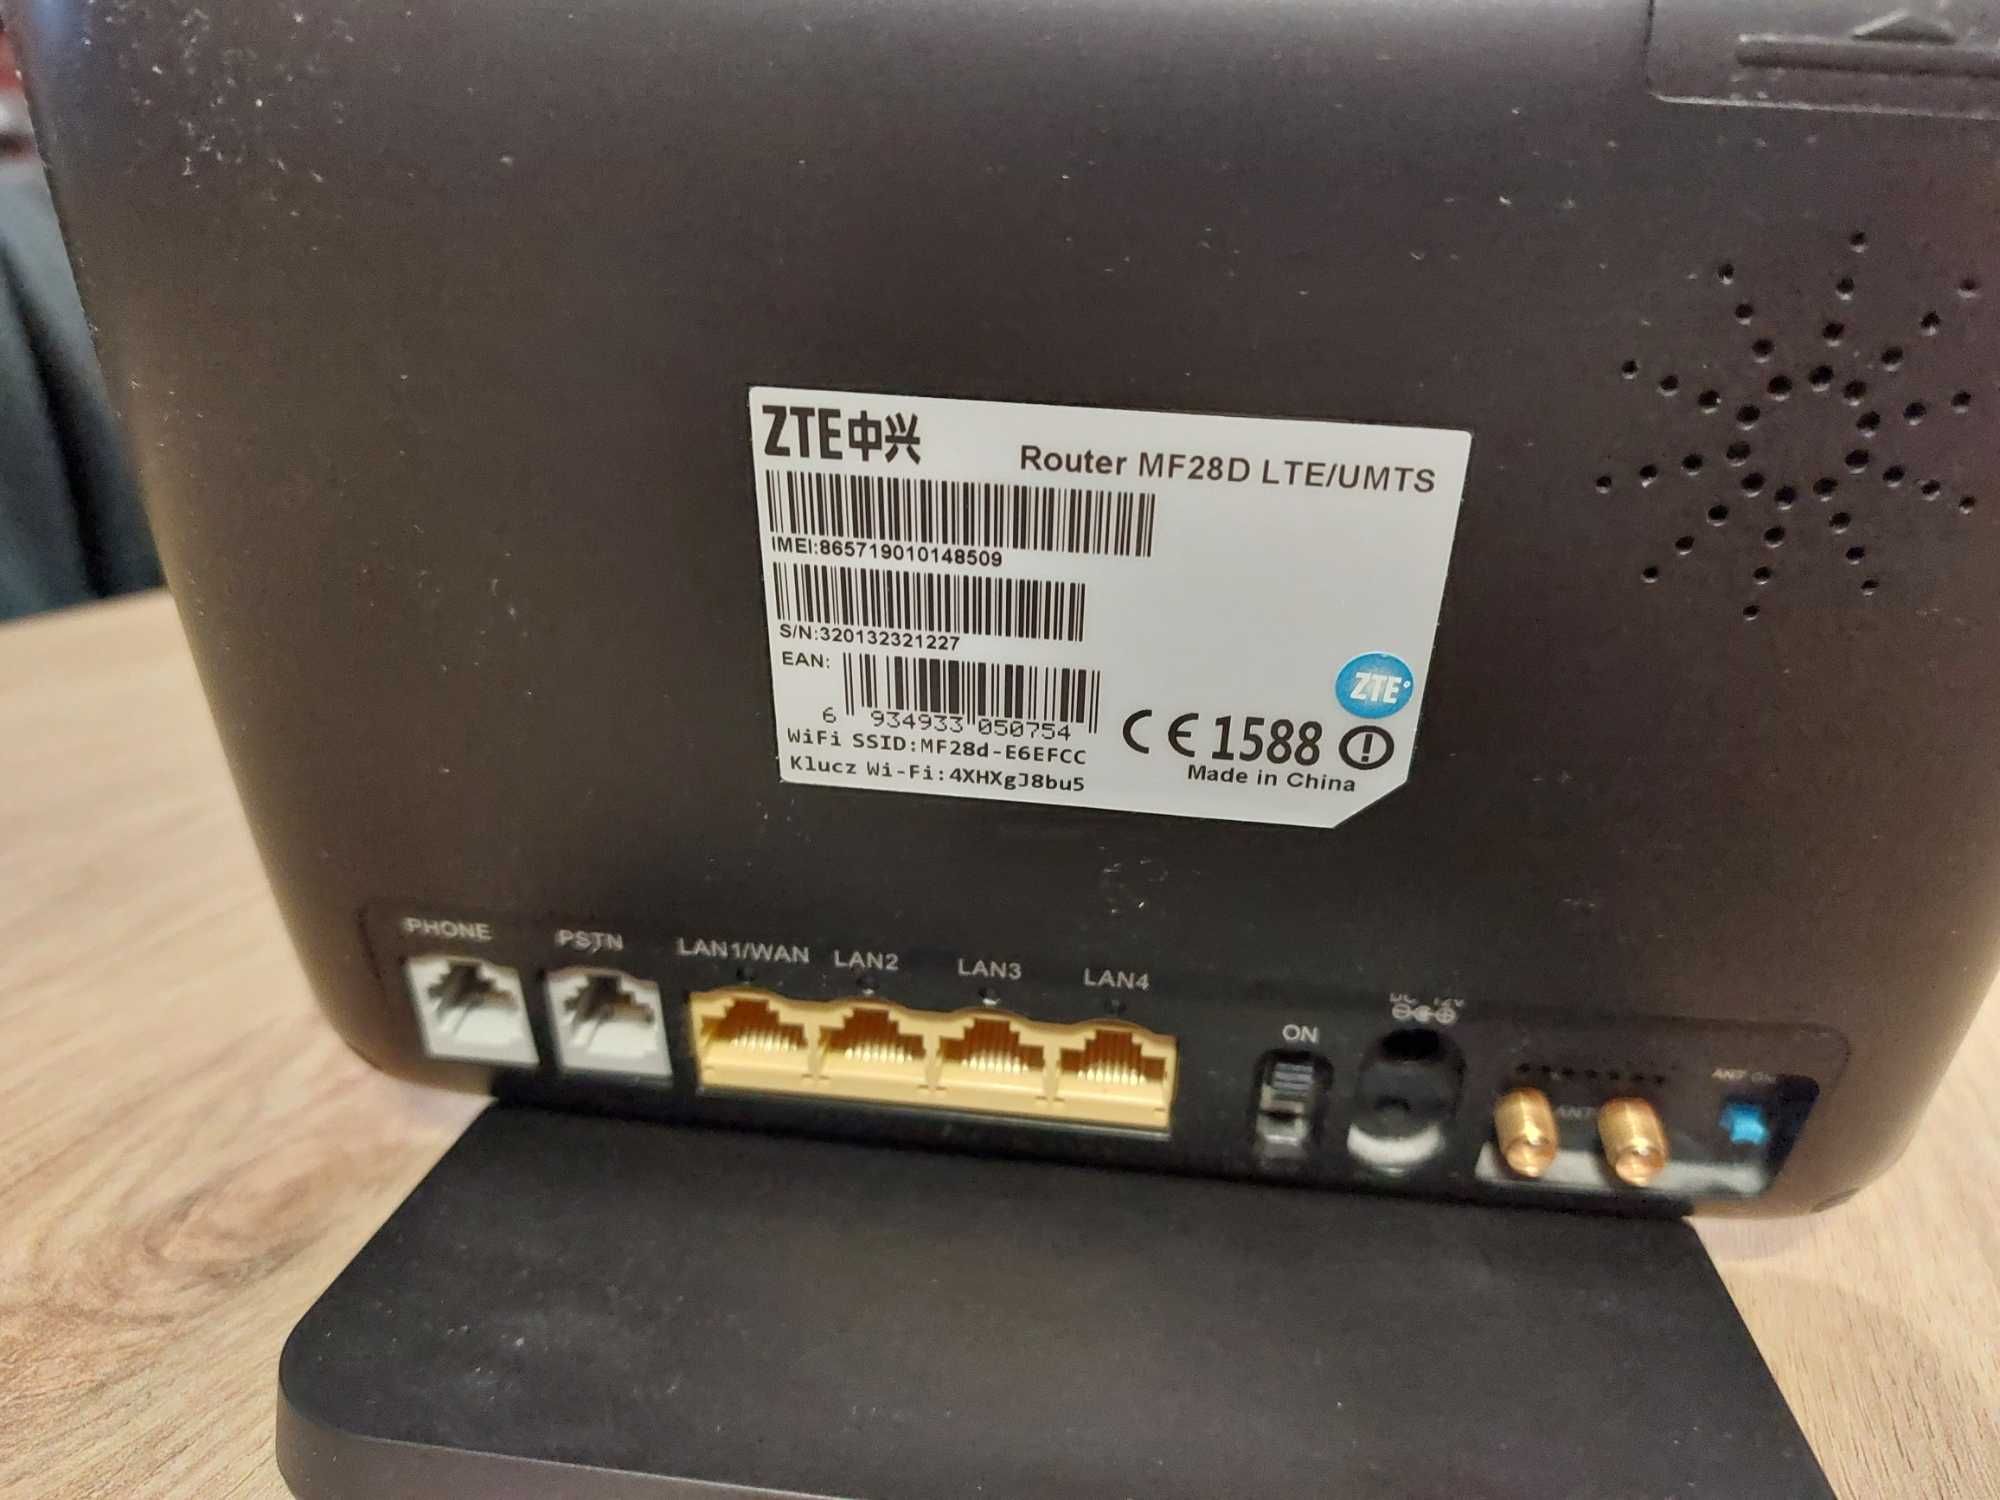 Router ZTE MF28D 802.11n 802.11g 802.11b LTE/UMTS